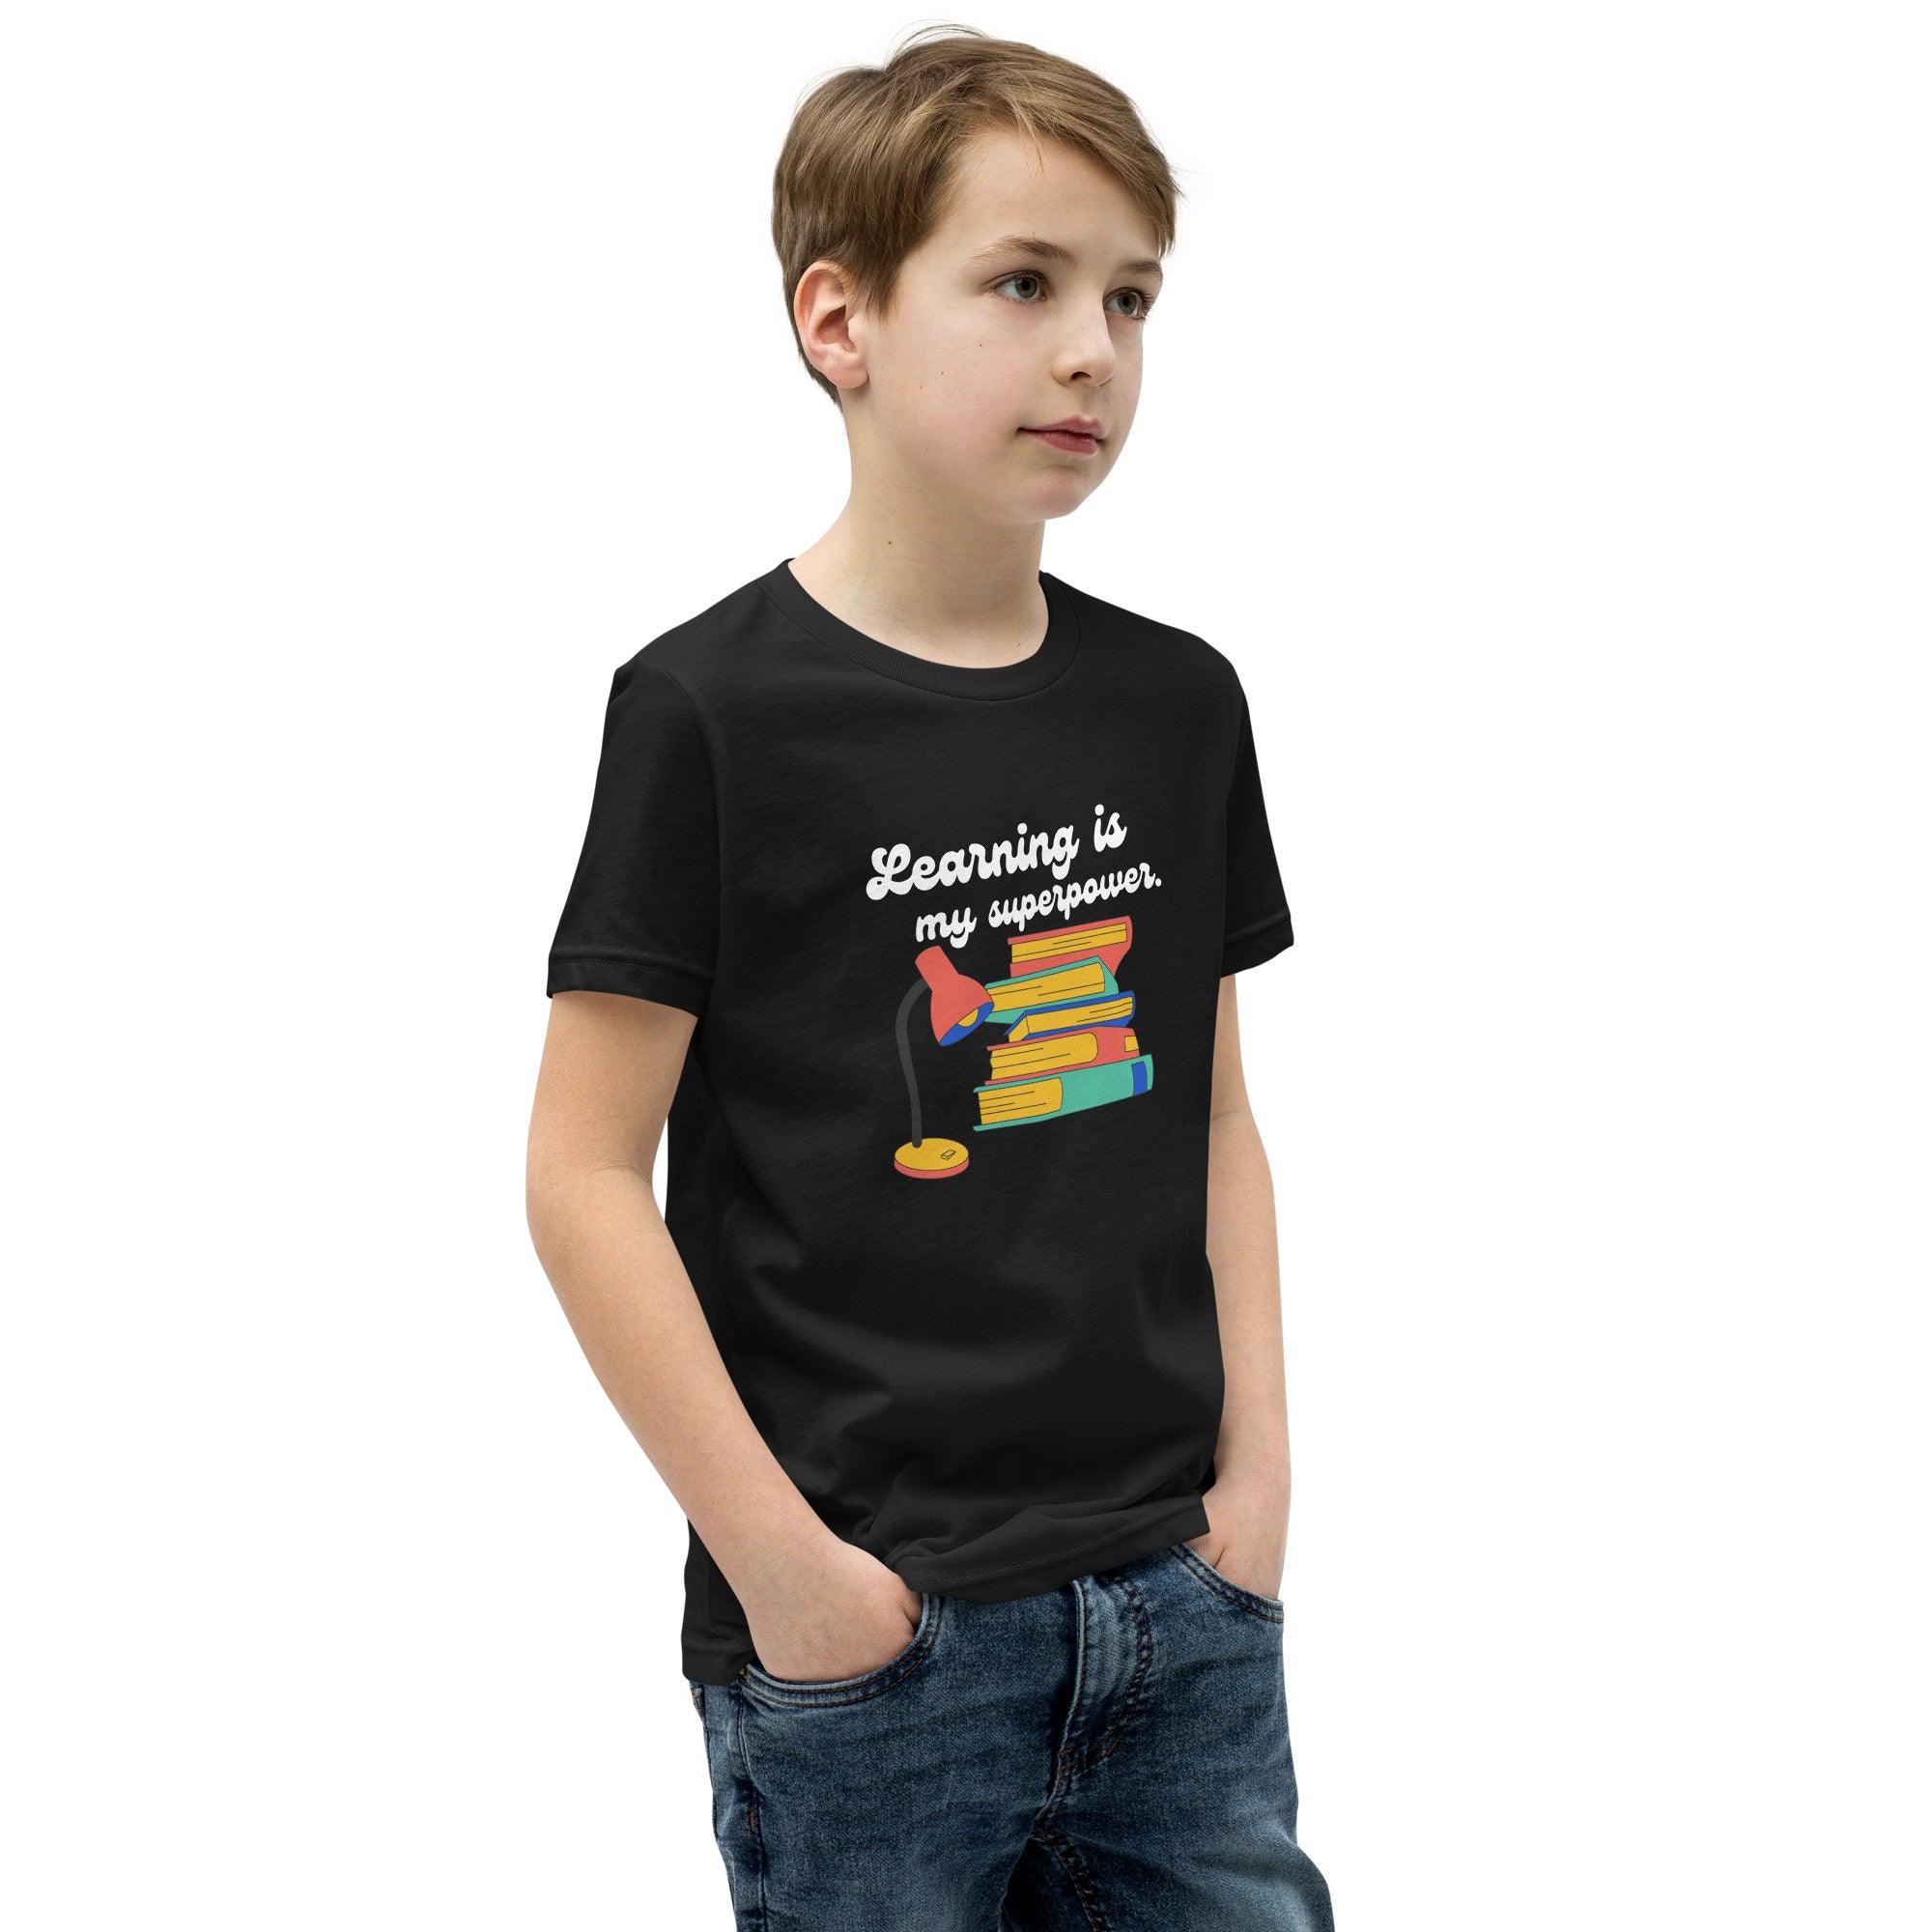 Learning Is My Superpower | Youth Short Sleeve T-Shirt | Youth Positive Affirmation T-Shirt - Affirm Effect